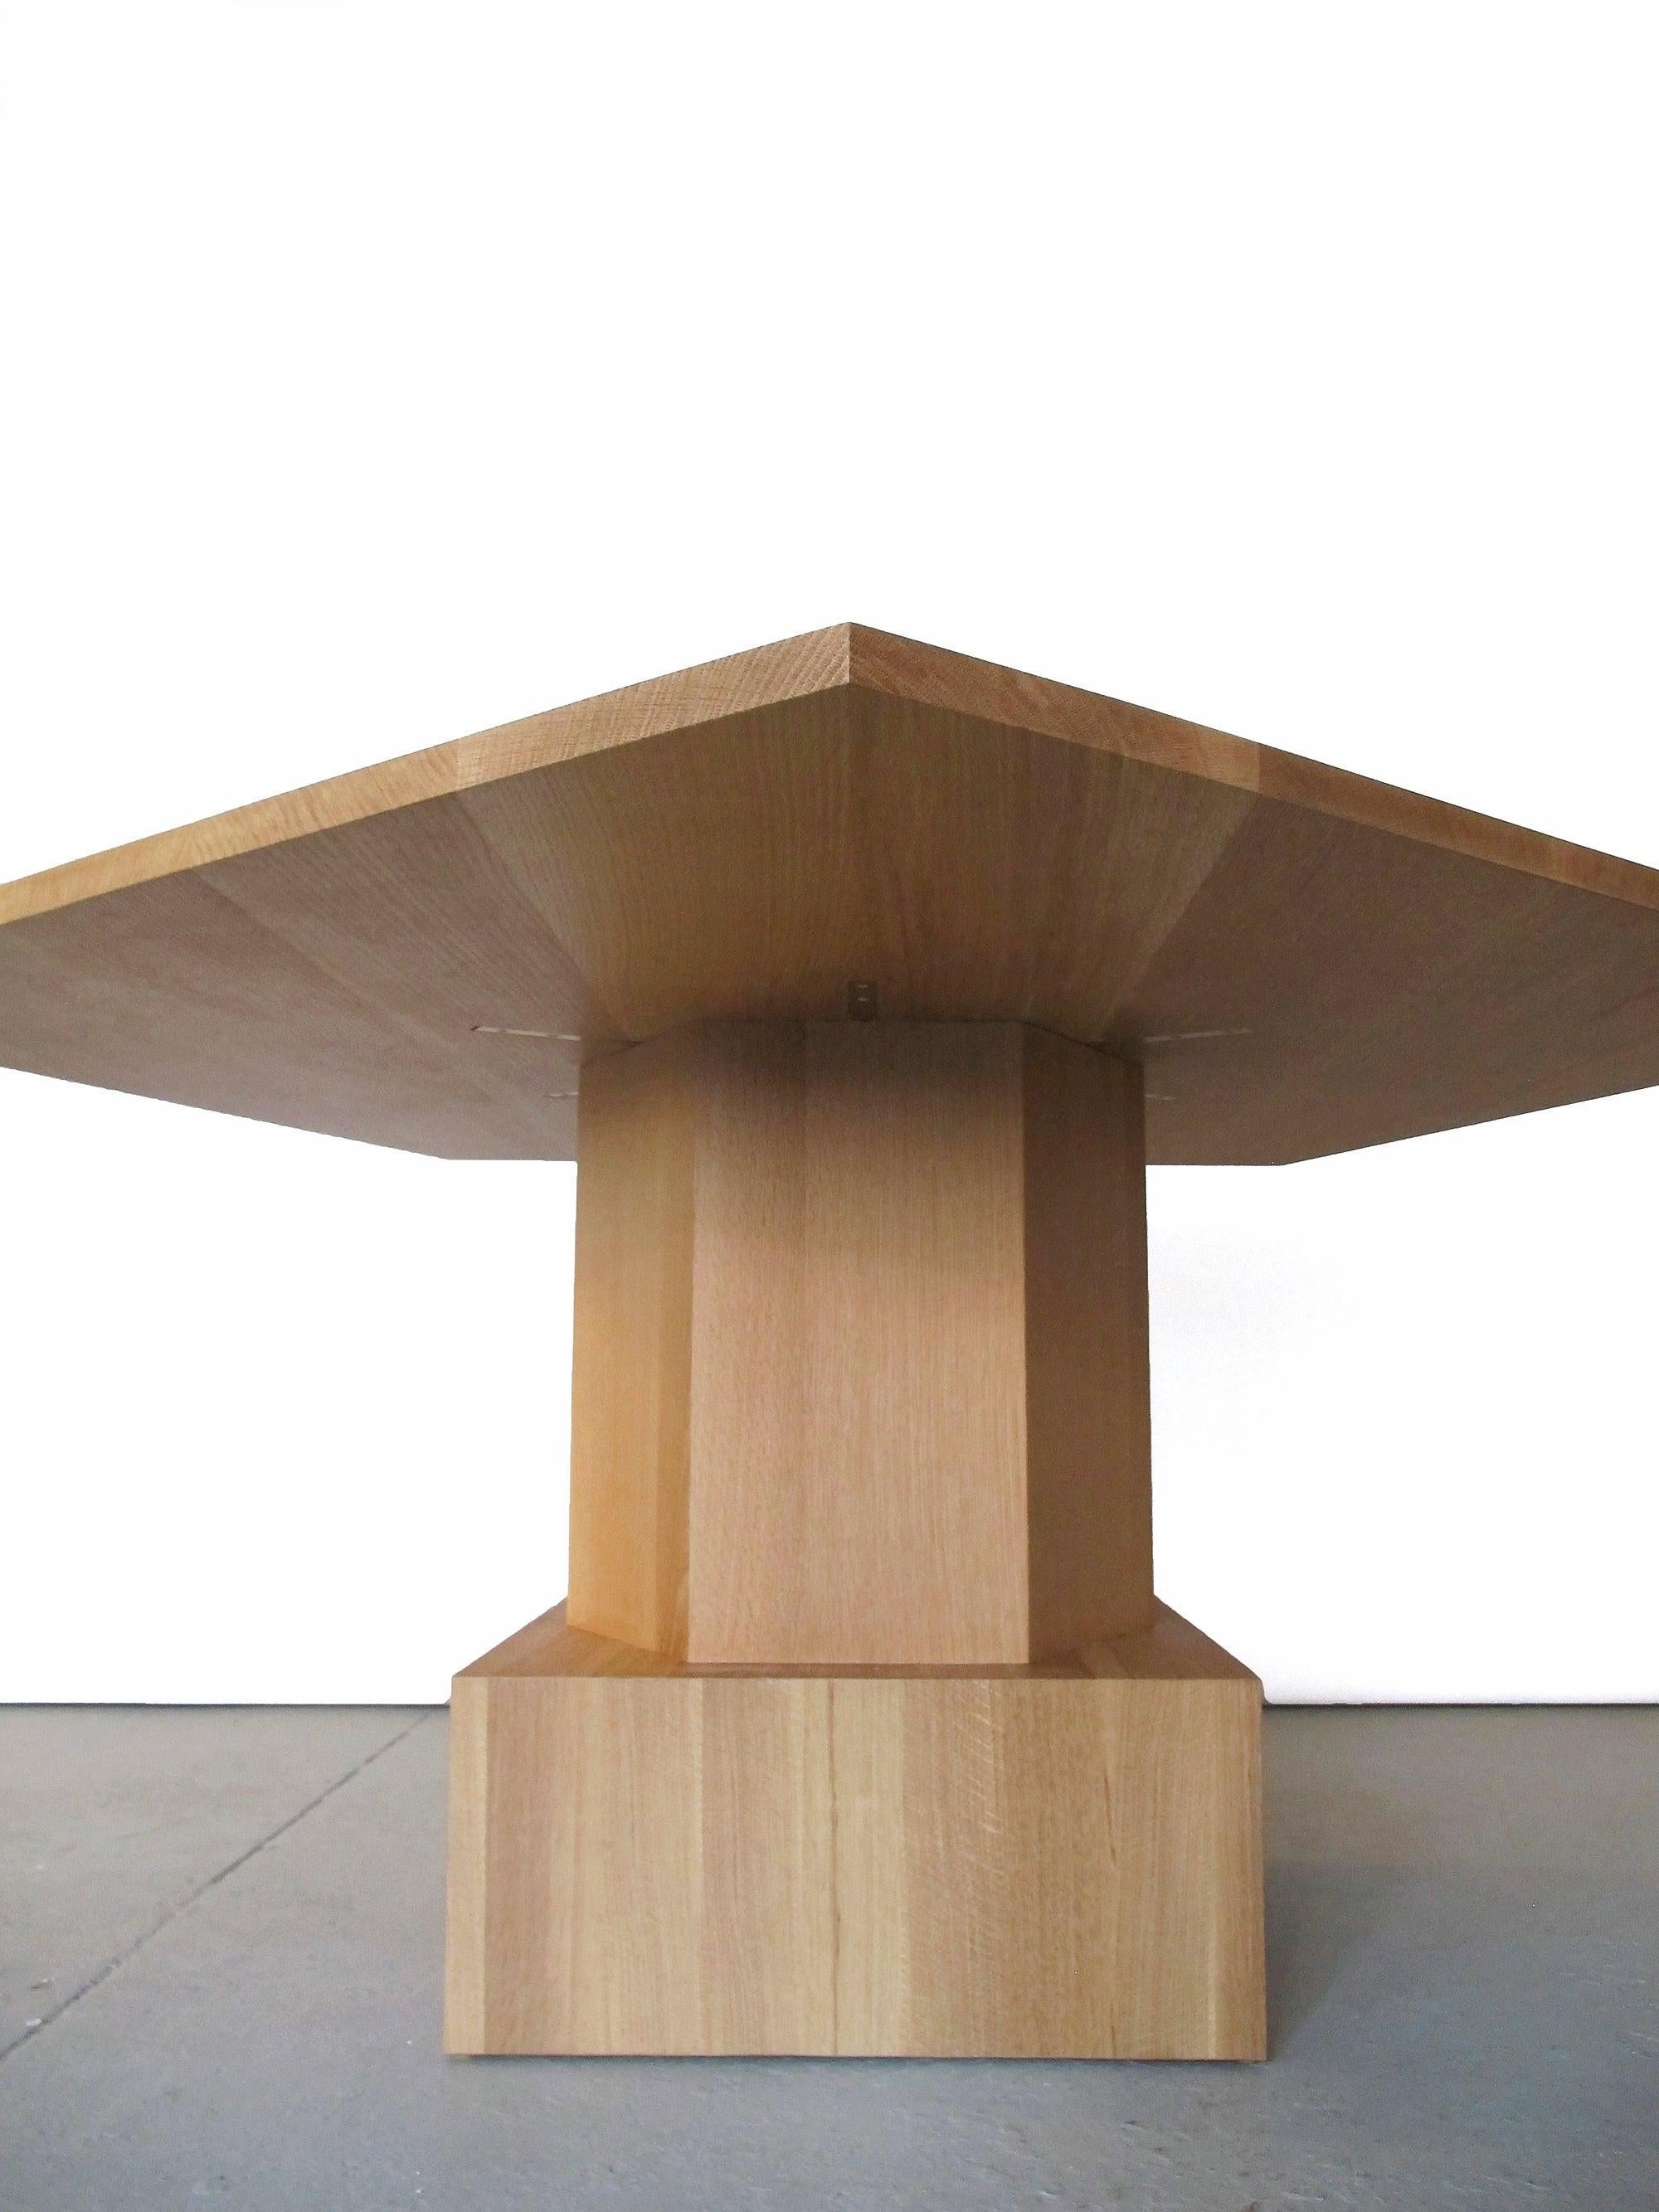 Dining or Center Table in natural Oak by Tinatin Kilaberidze In Excellent Condition For Sale In New York, NY